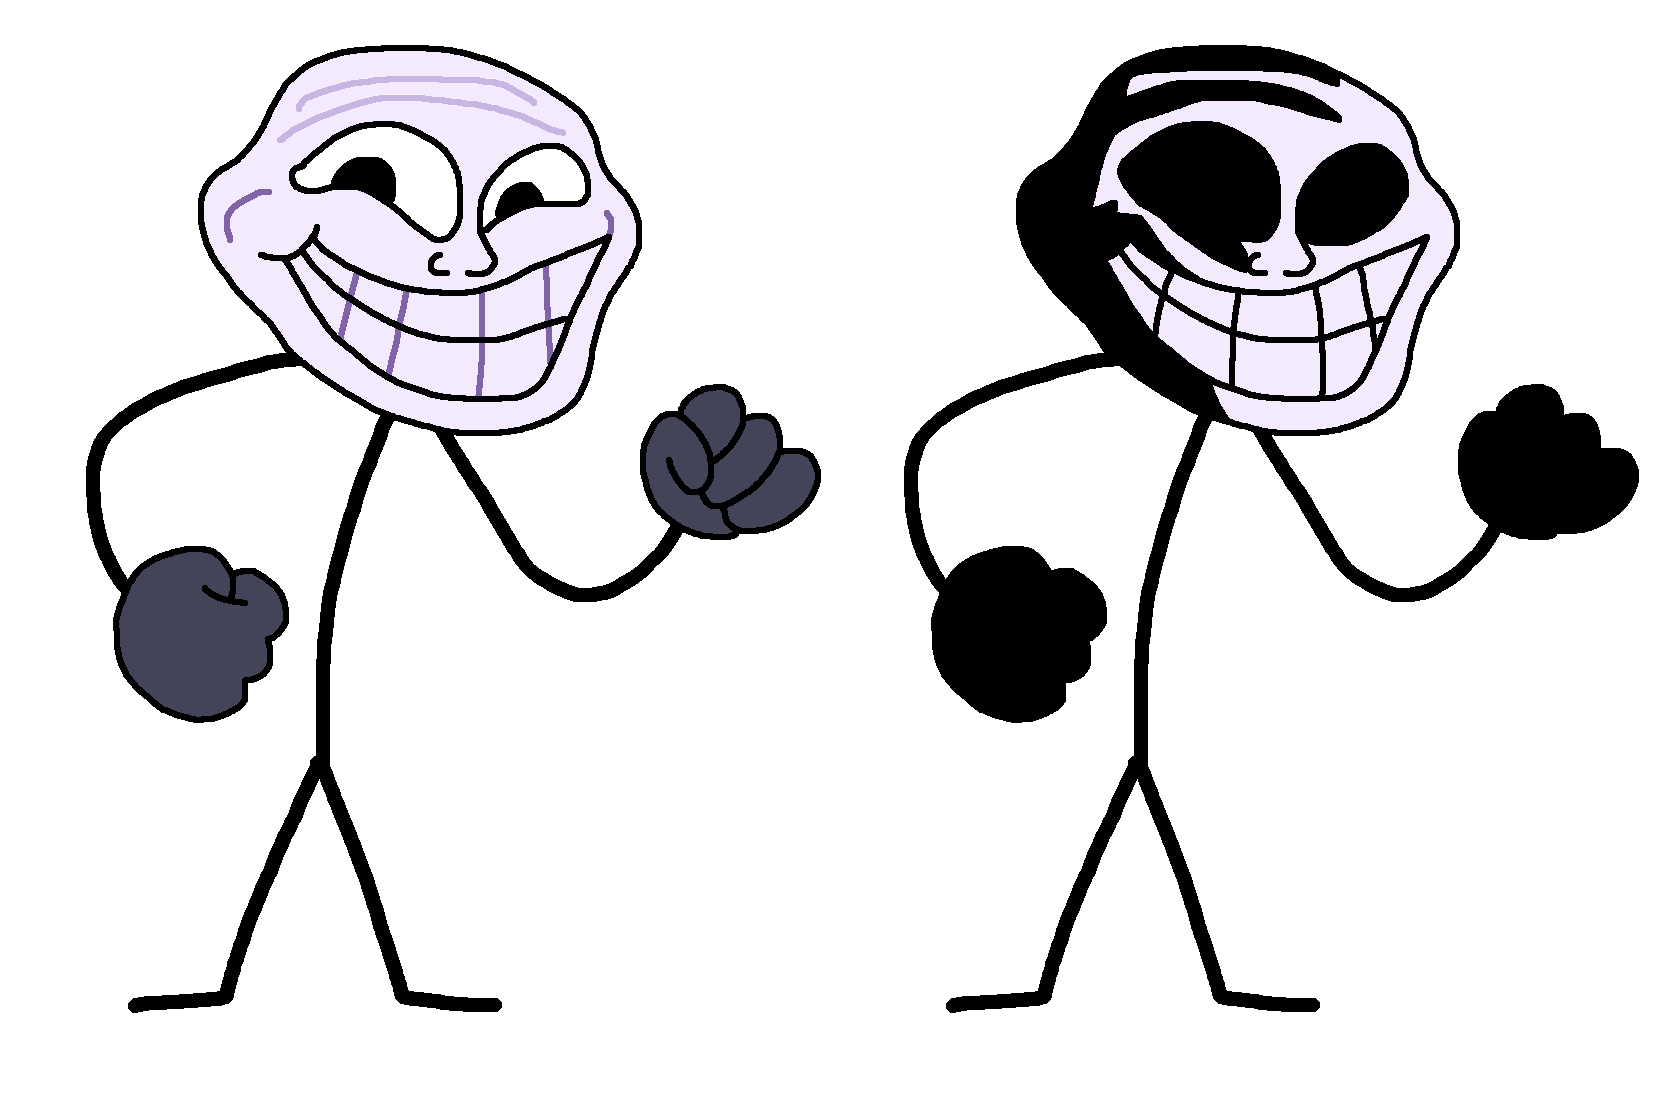 This is the story of troll face by trollge2015 on DeviantArt